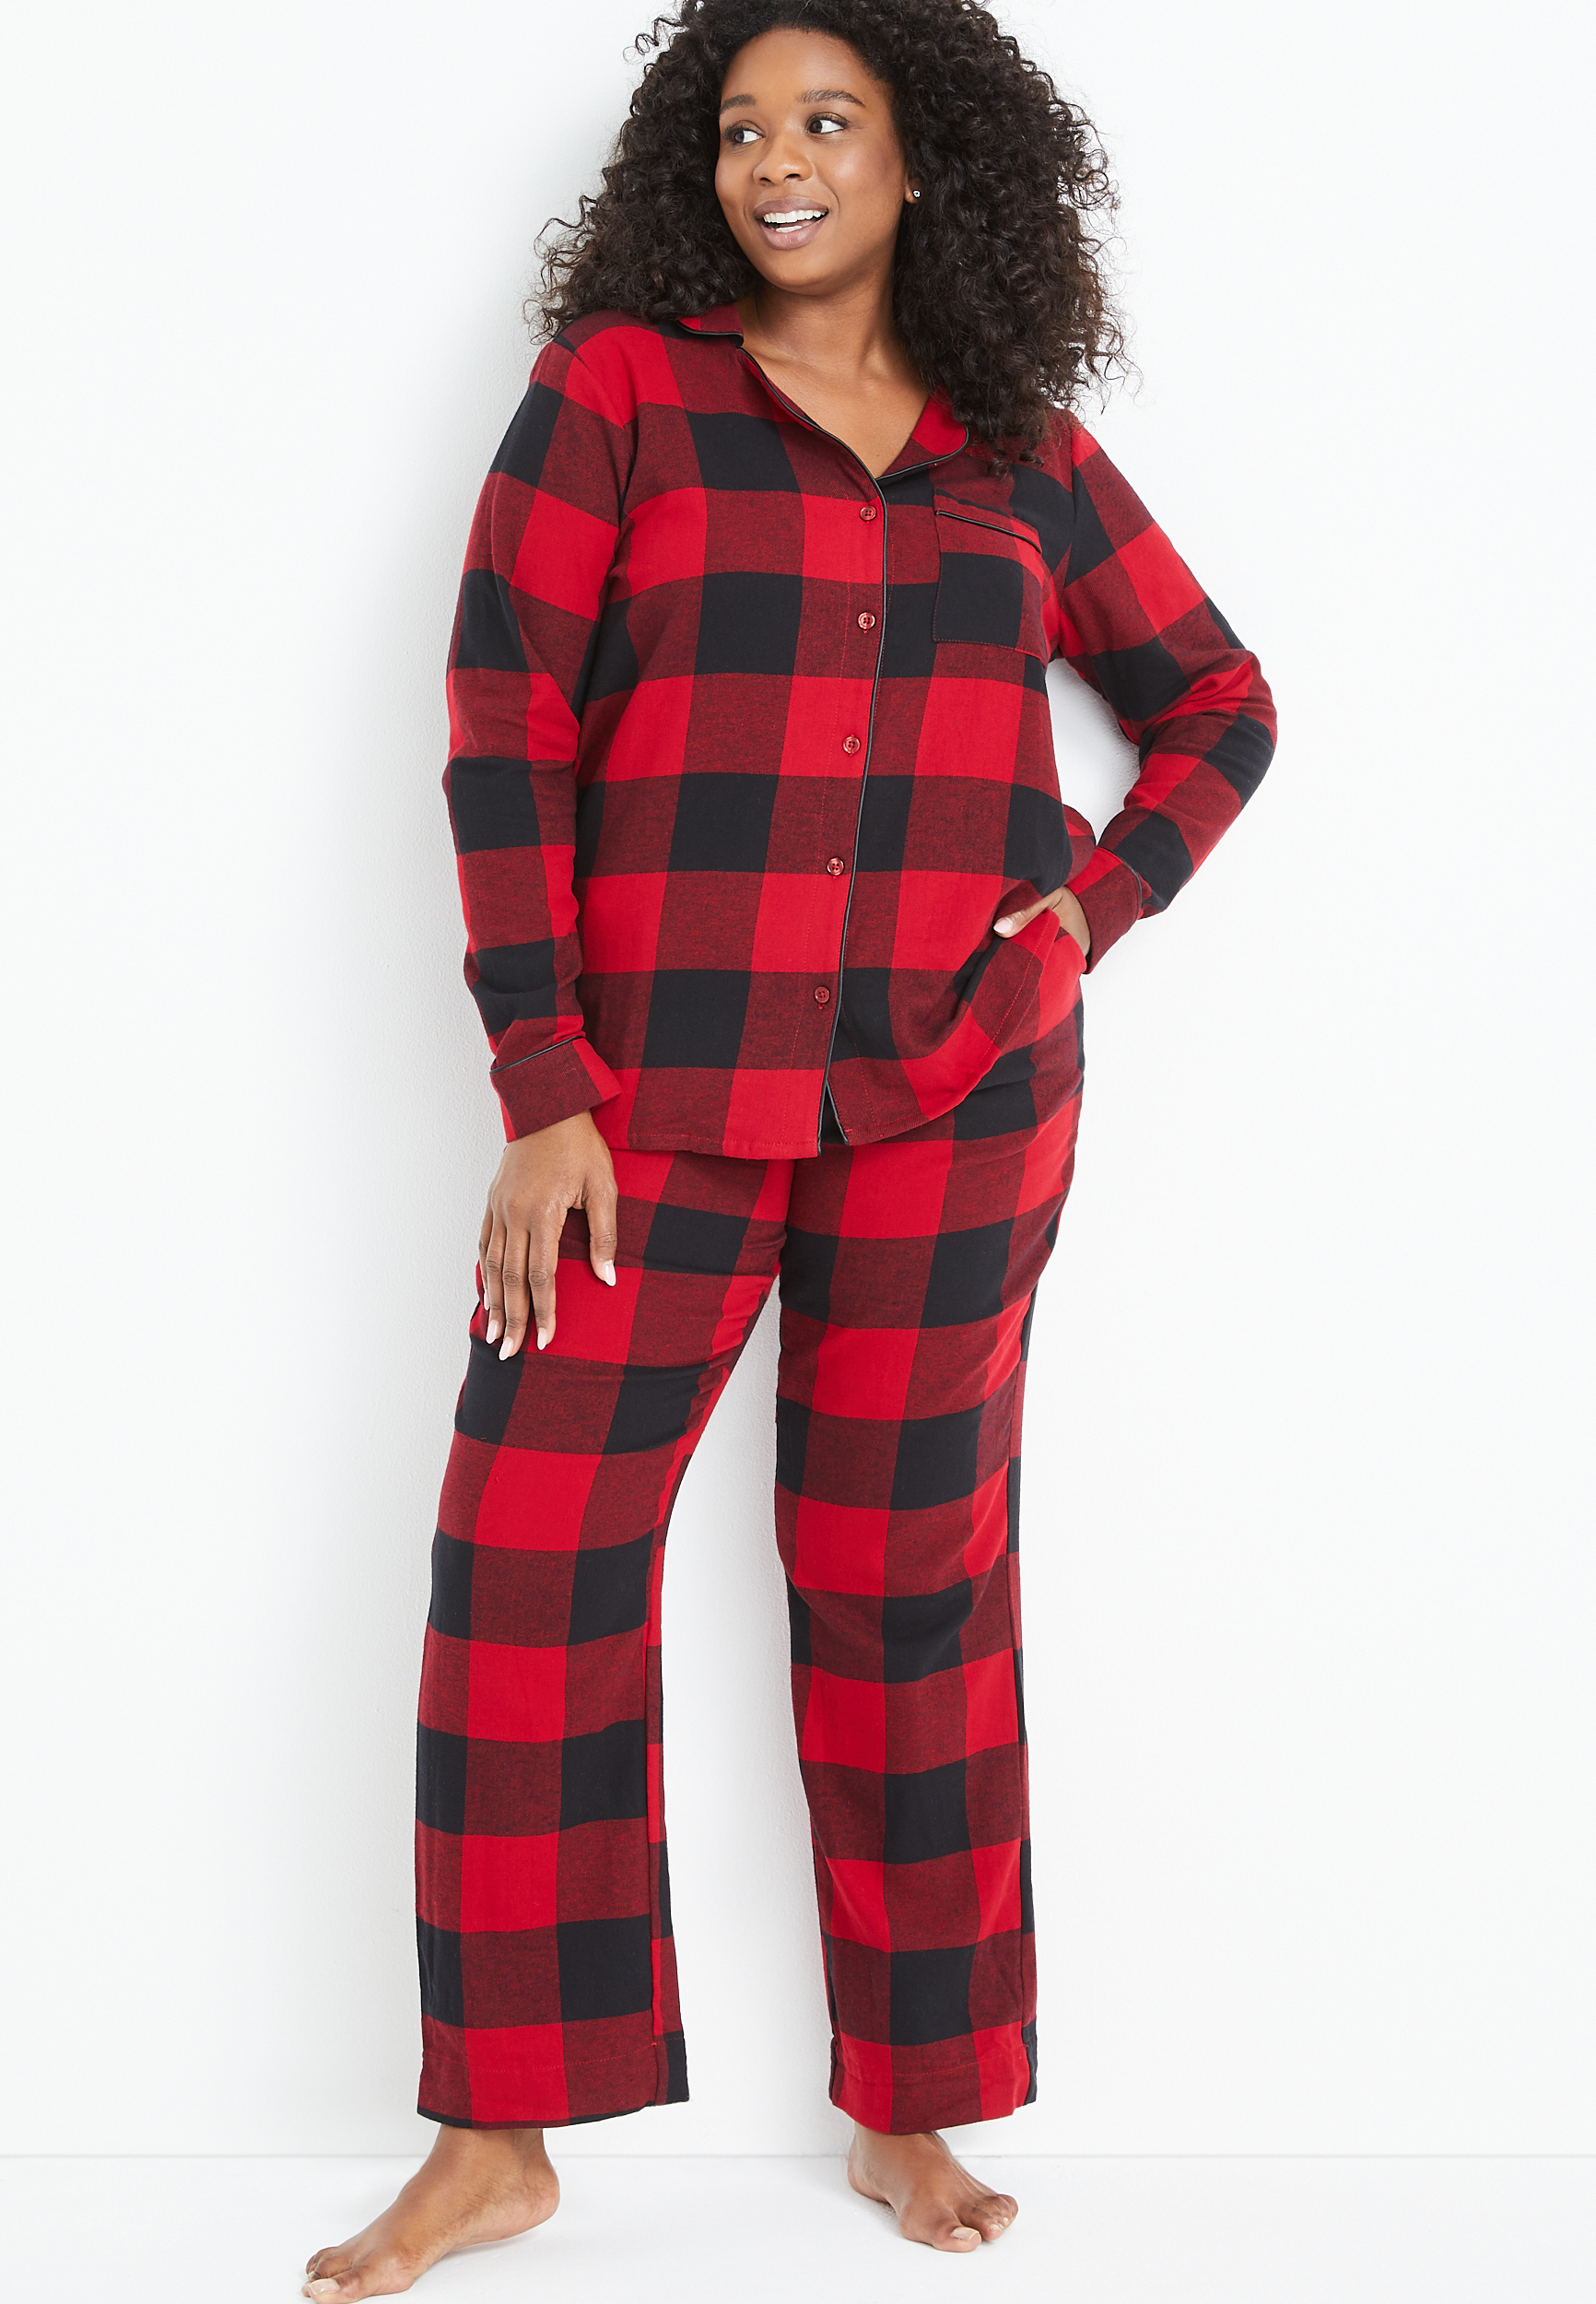 tennis bånd Mindre end Women's Plus Size Pajamas And Sleepwear | maurices